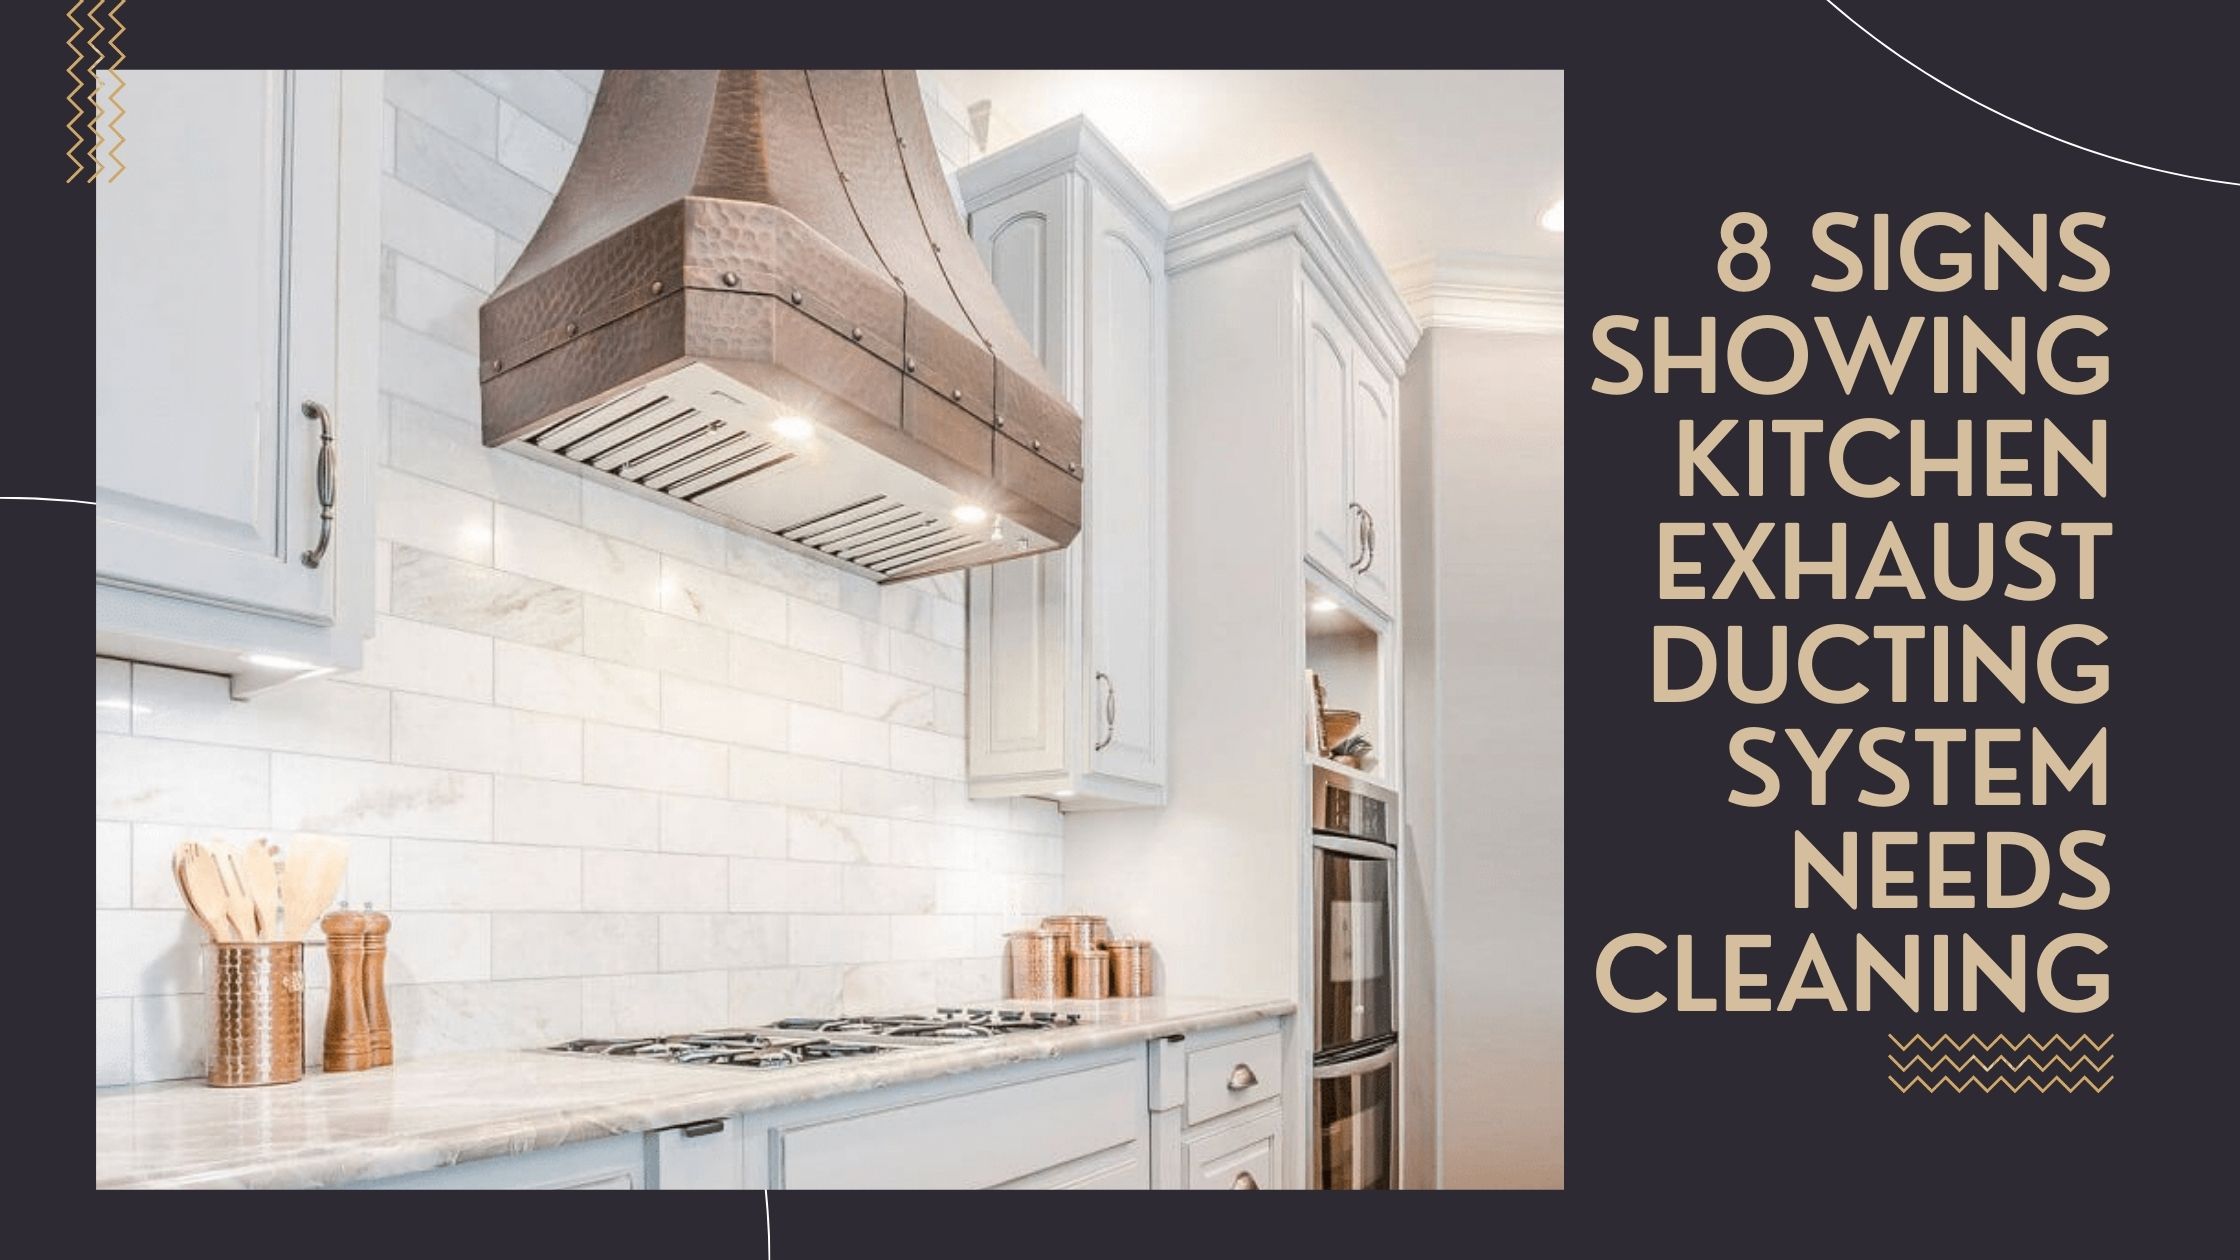 8 Signs Showing Kitchen Exhaust Ducting System Needs Cleaning